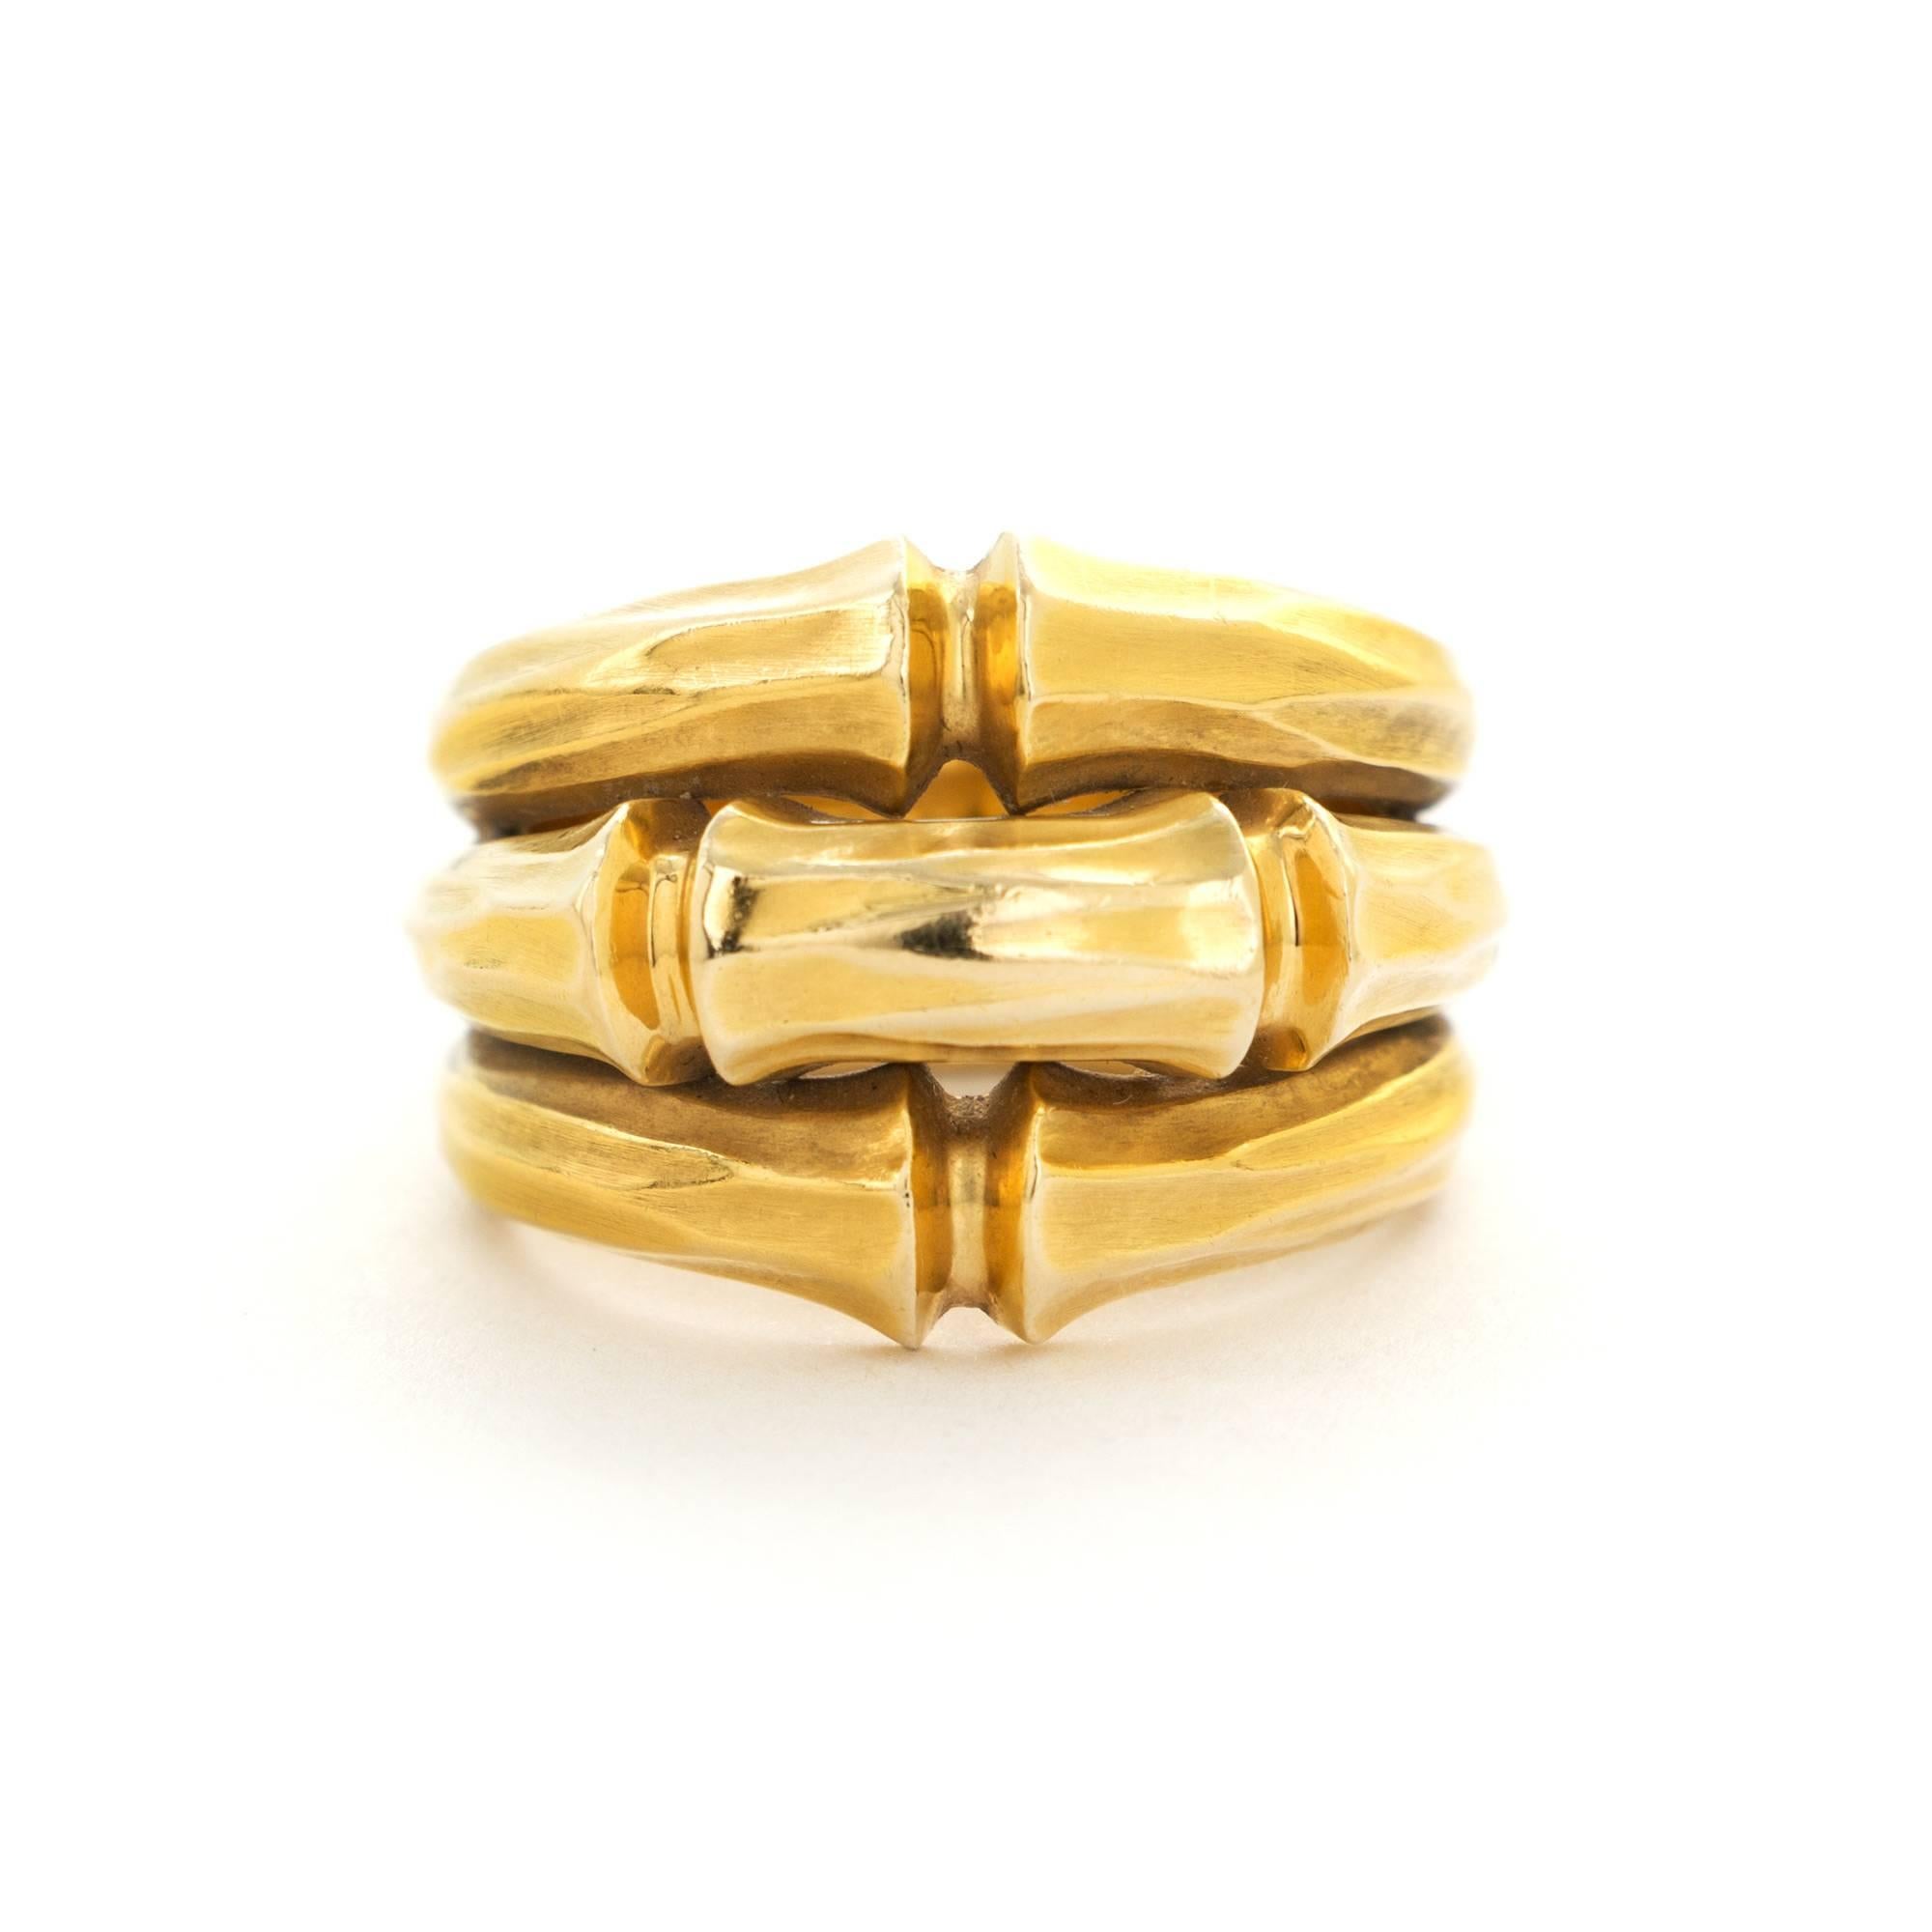 An 18k Yellow Gold Bamboo-Design Ring by Cartier. Made in France. Size 56. Signed 